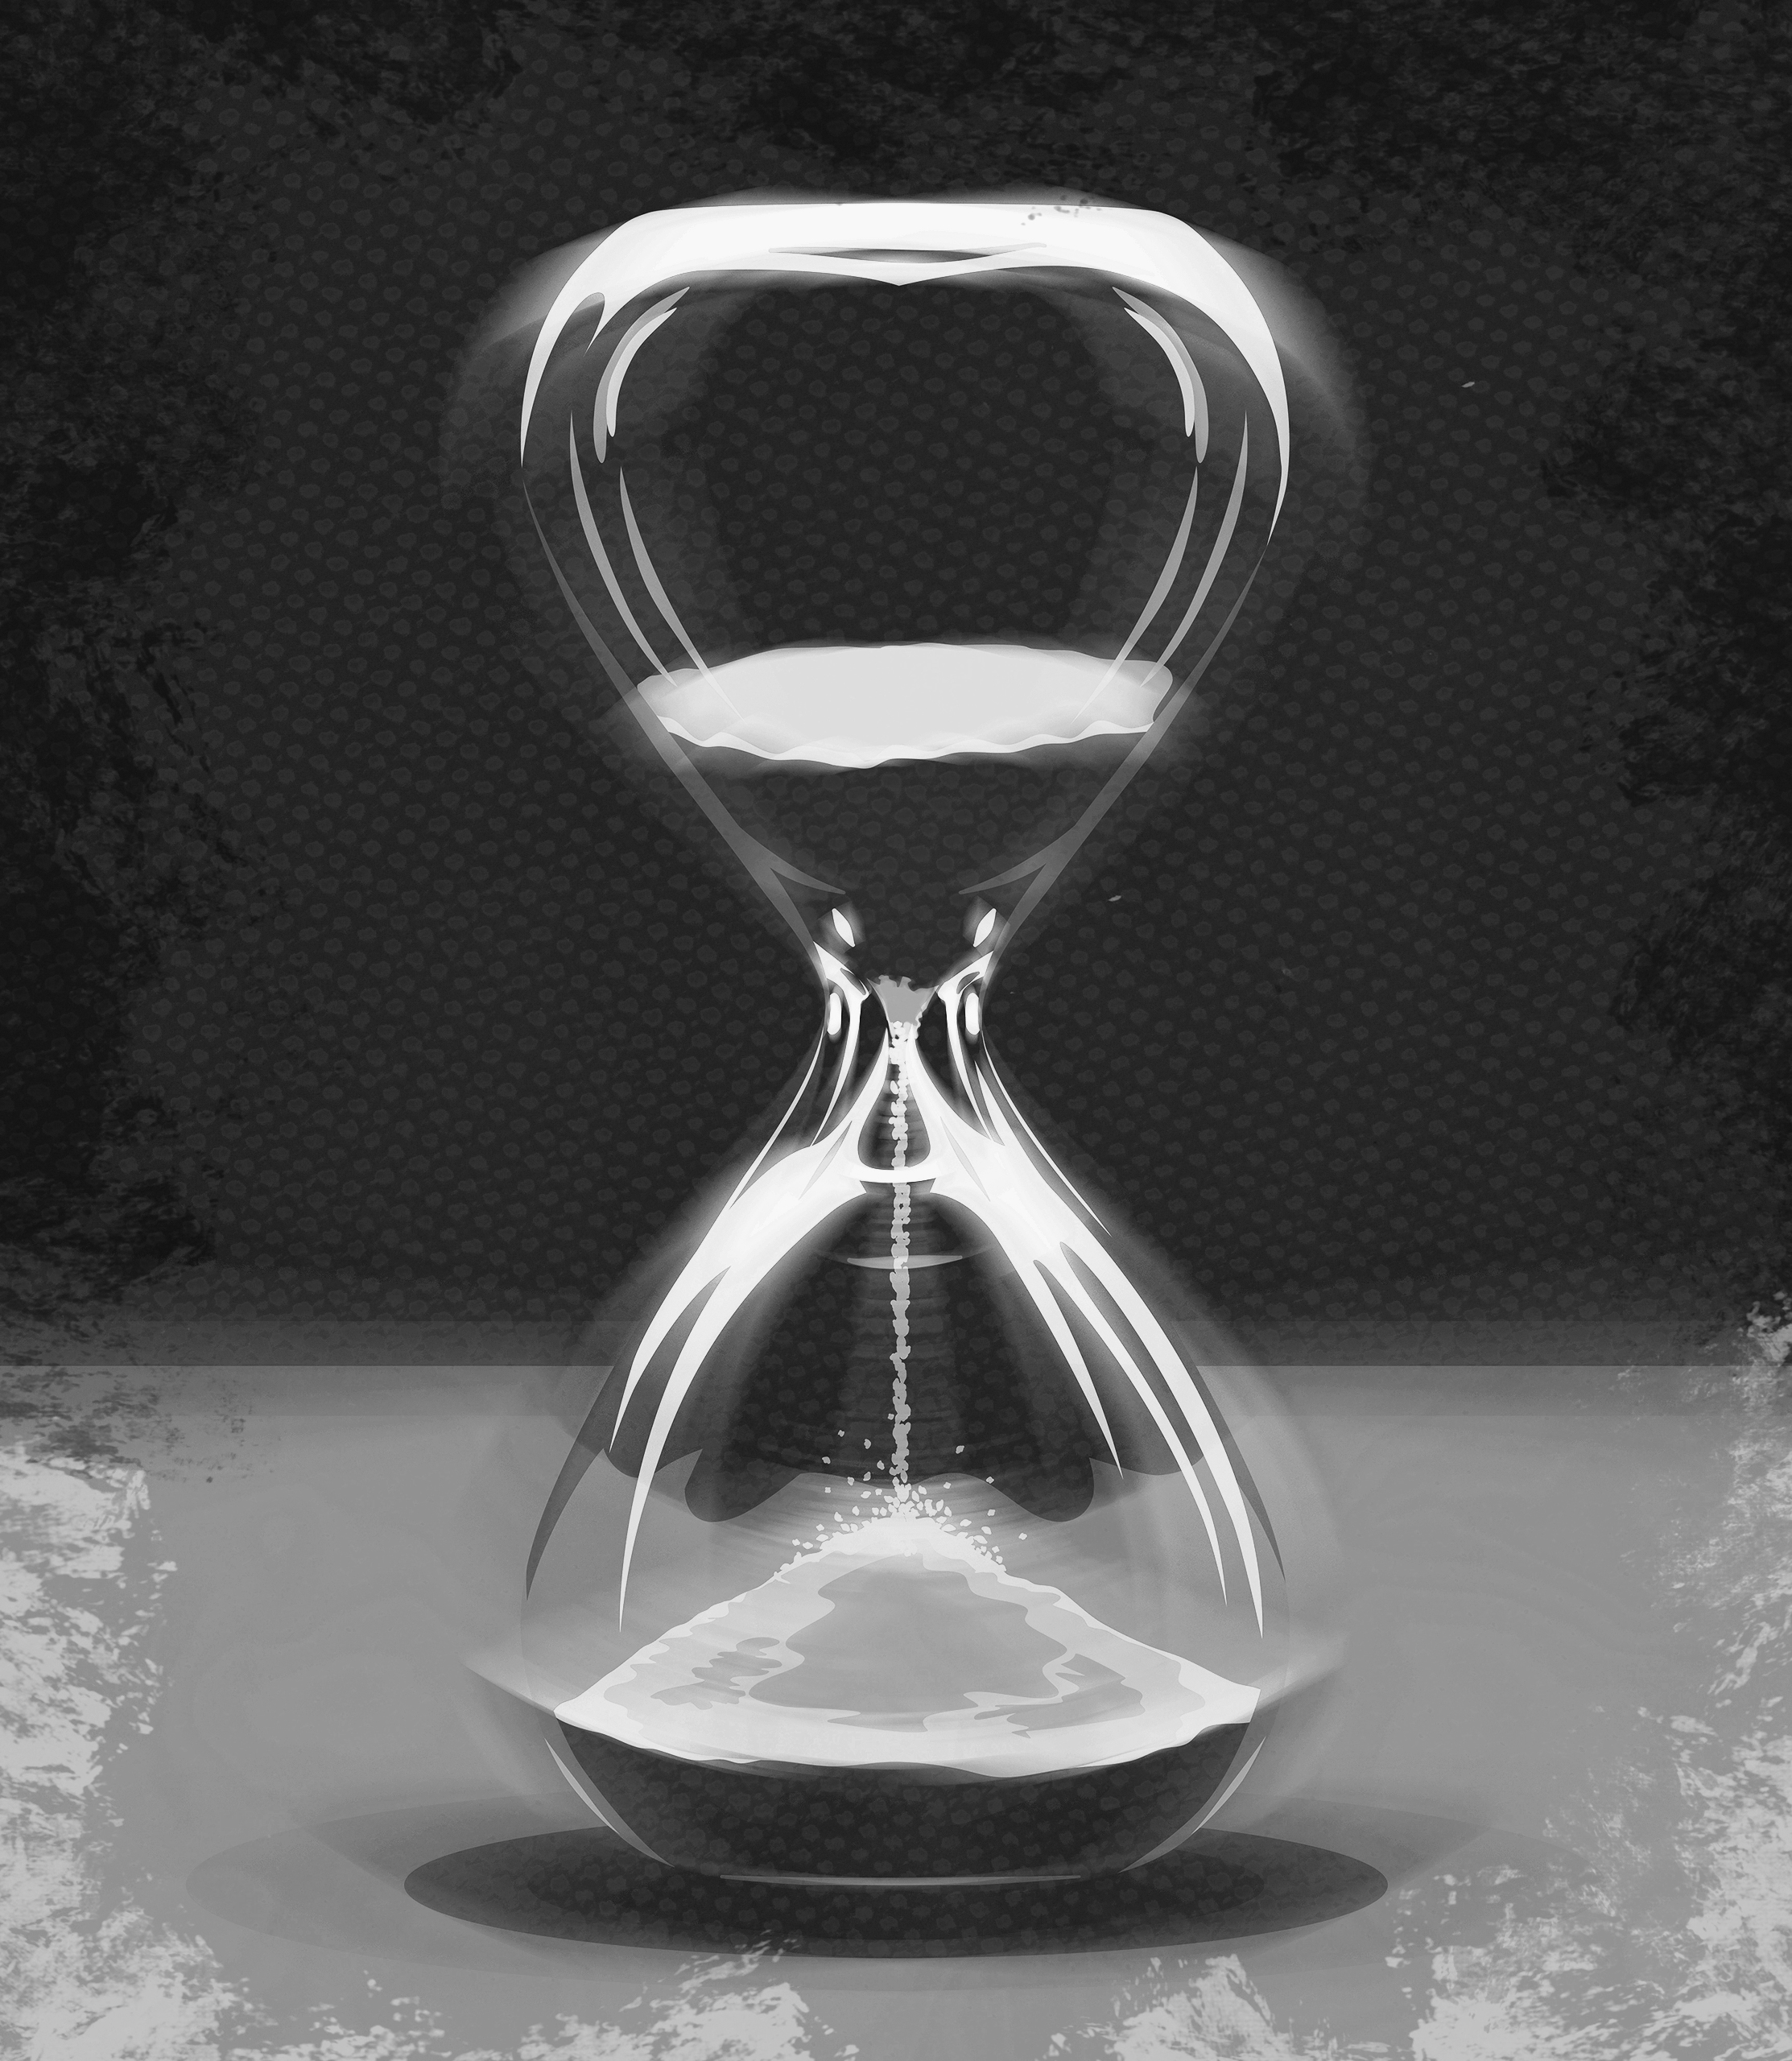 A digital illustration shows a motion-blurred hourglass in stark black and white surrounded by a hand painted border of black and white brush strokes.